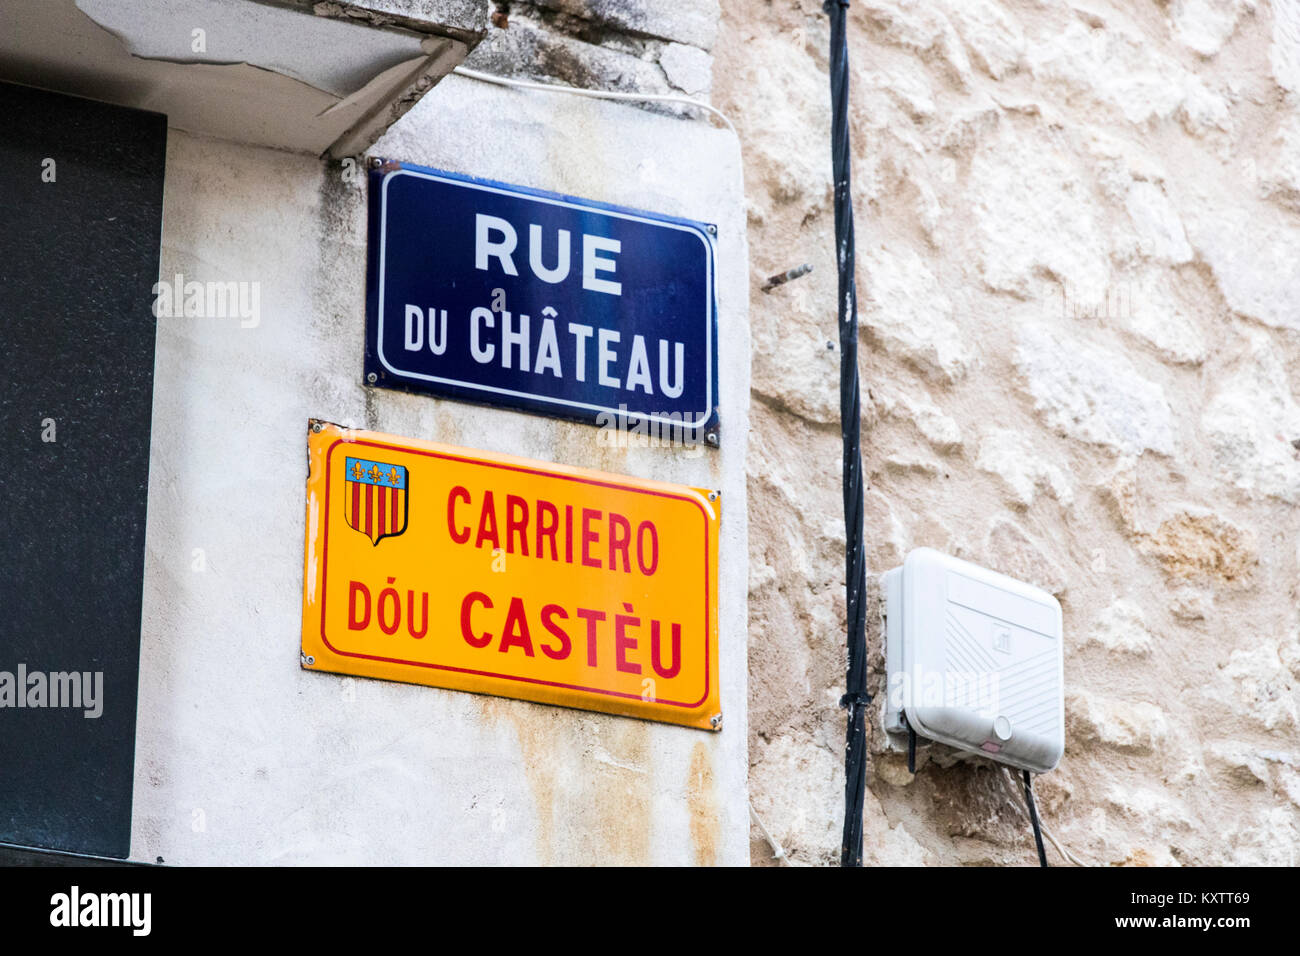 Bilingual street signs in Occitan and French. Saint-Remy-de-Provence, France Stock Photo